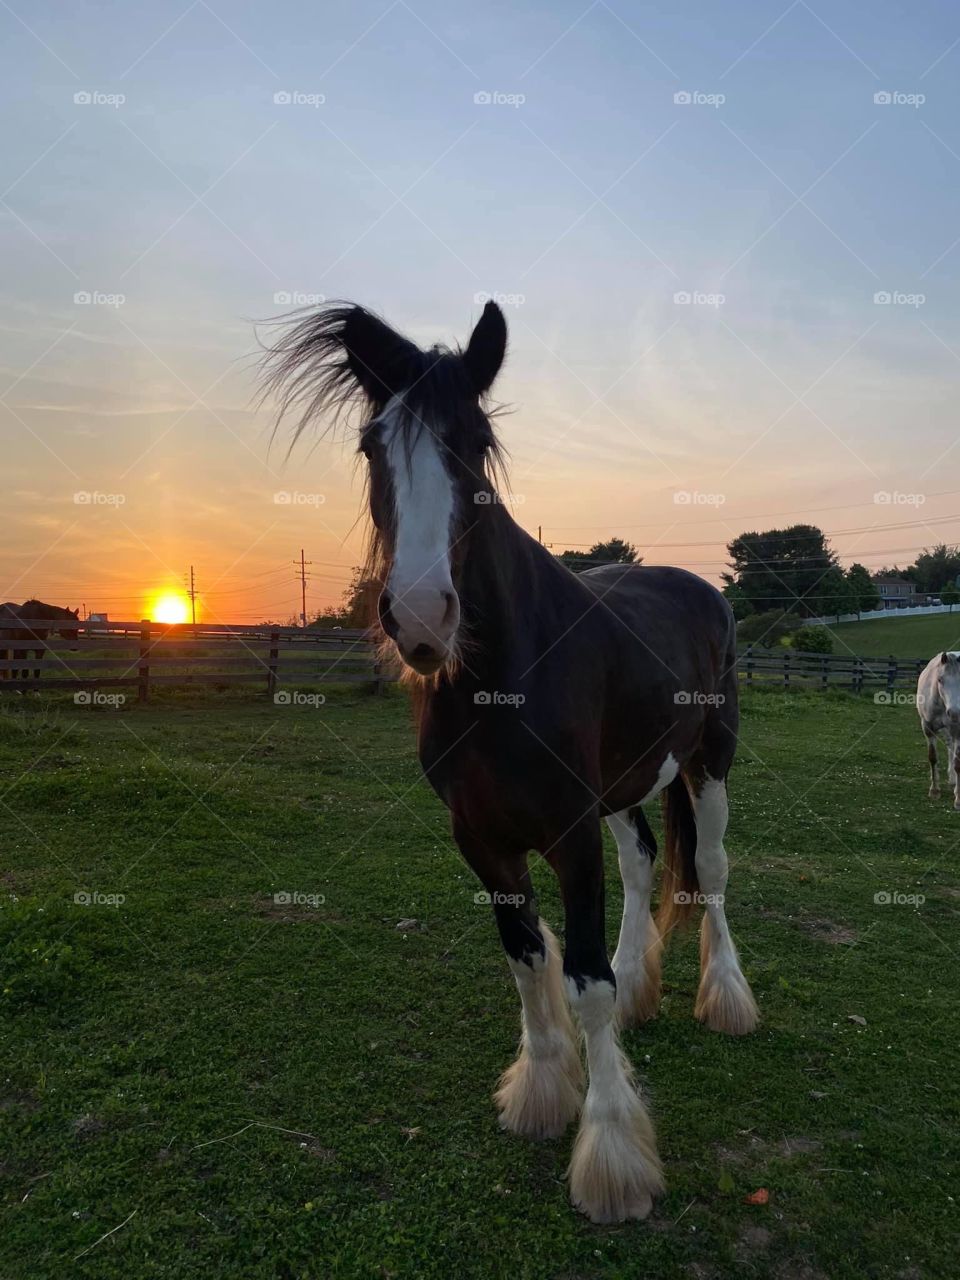 Horses in the sunset 